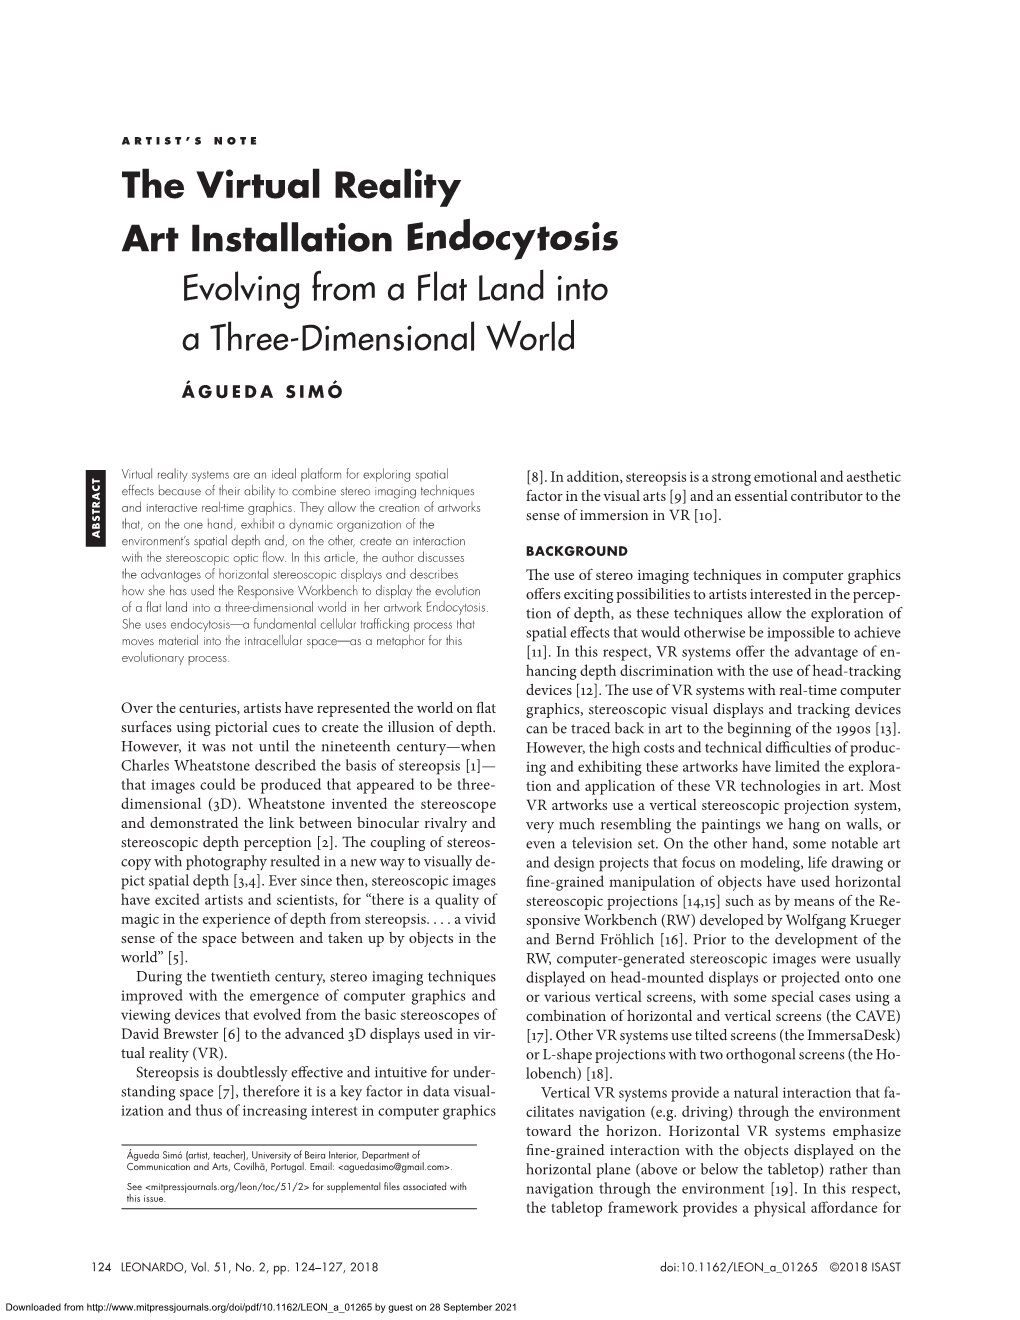 The Virtual Reality Art Installation Endocytosis Evolving from a Flat Land Into a Three-Dimensional World